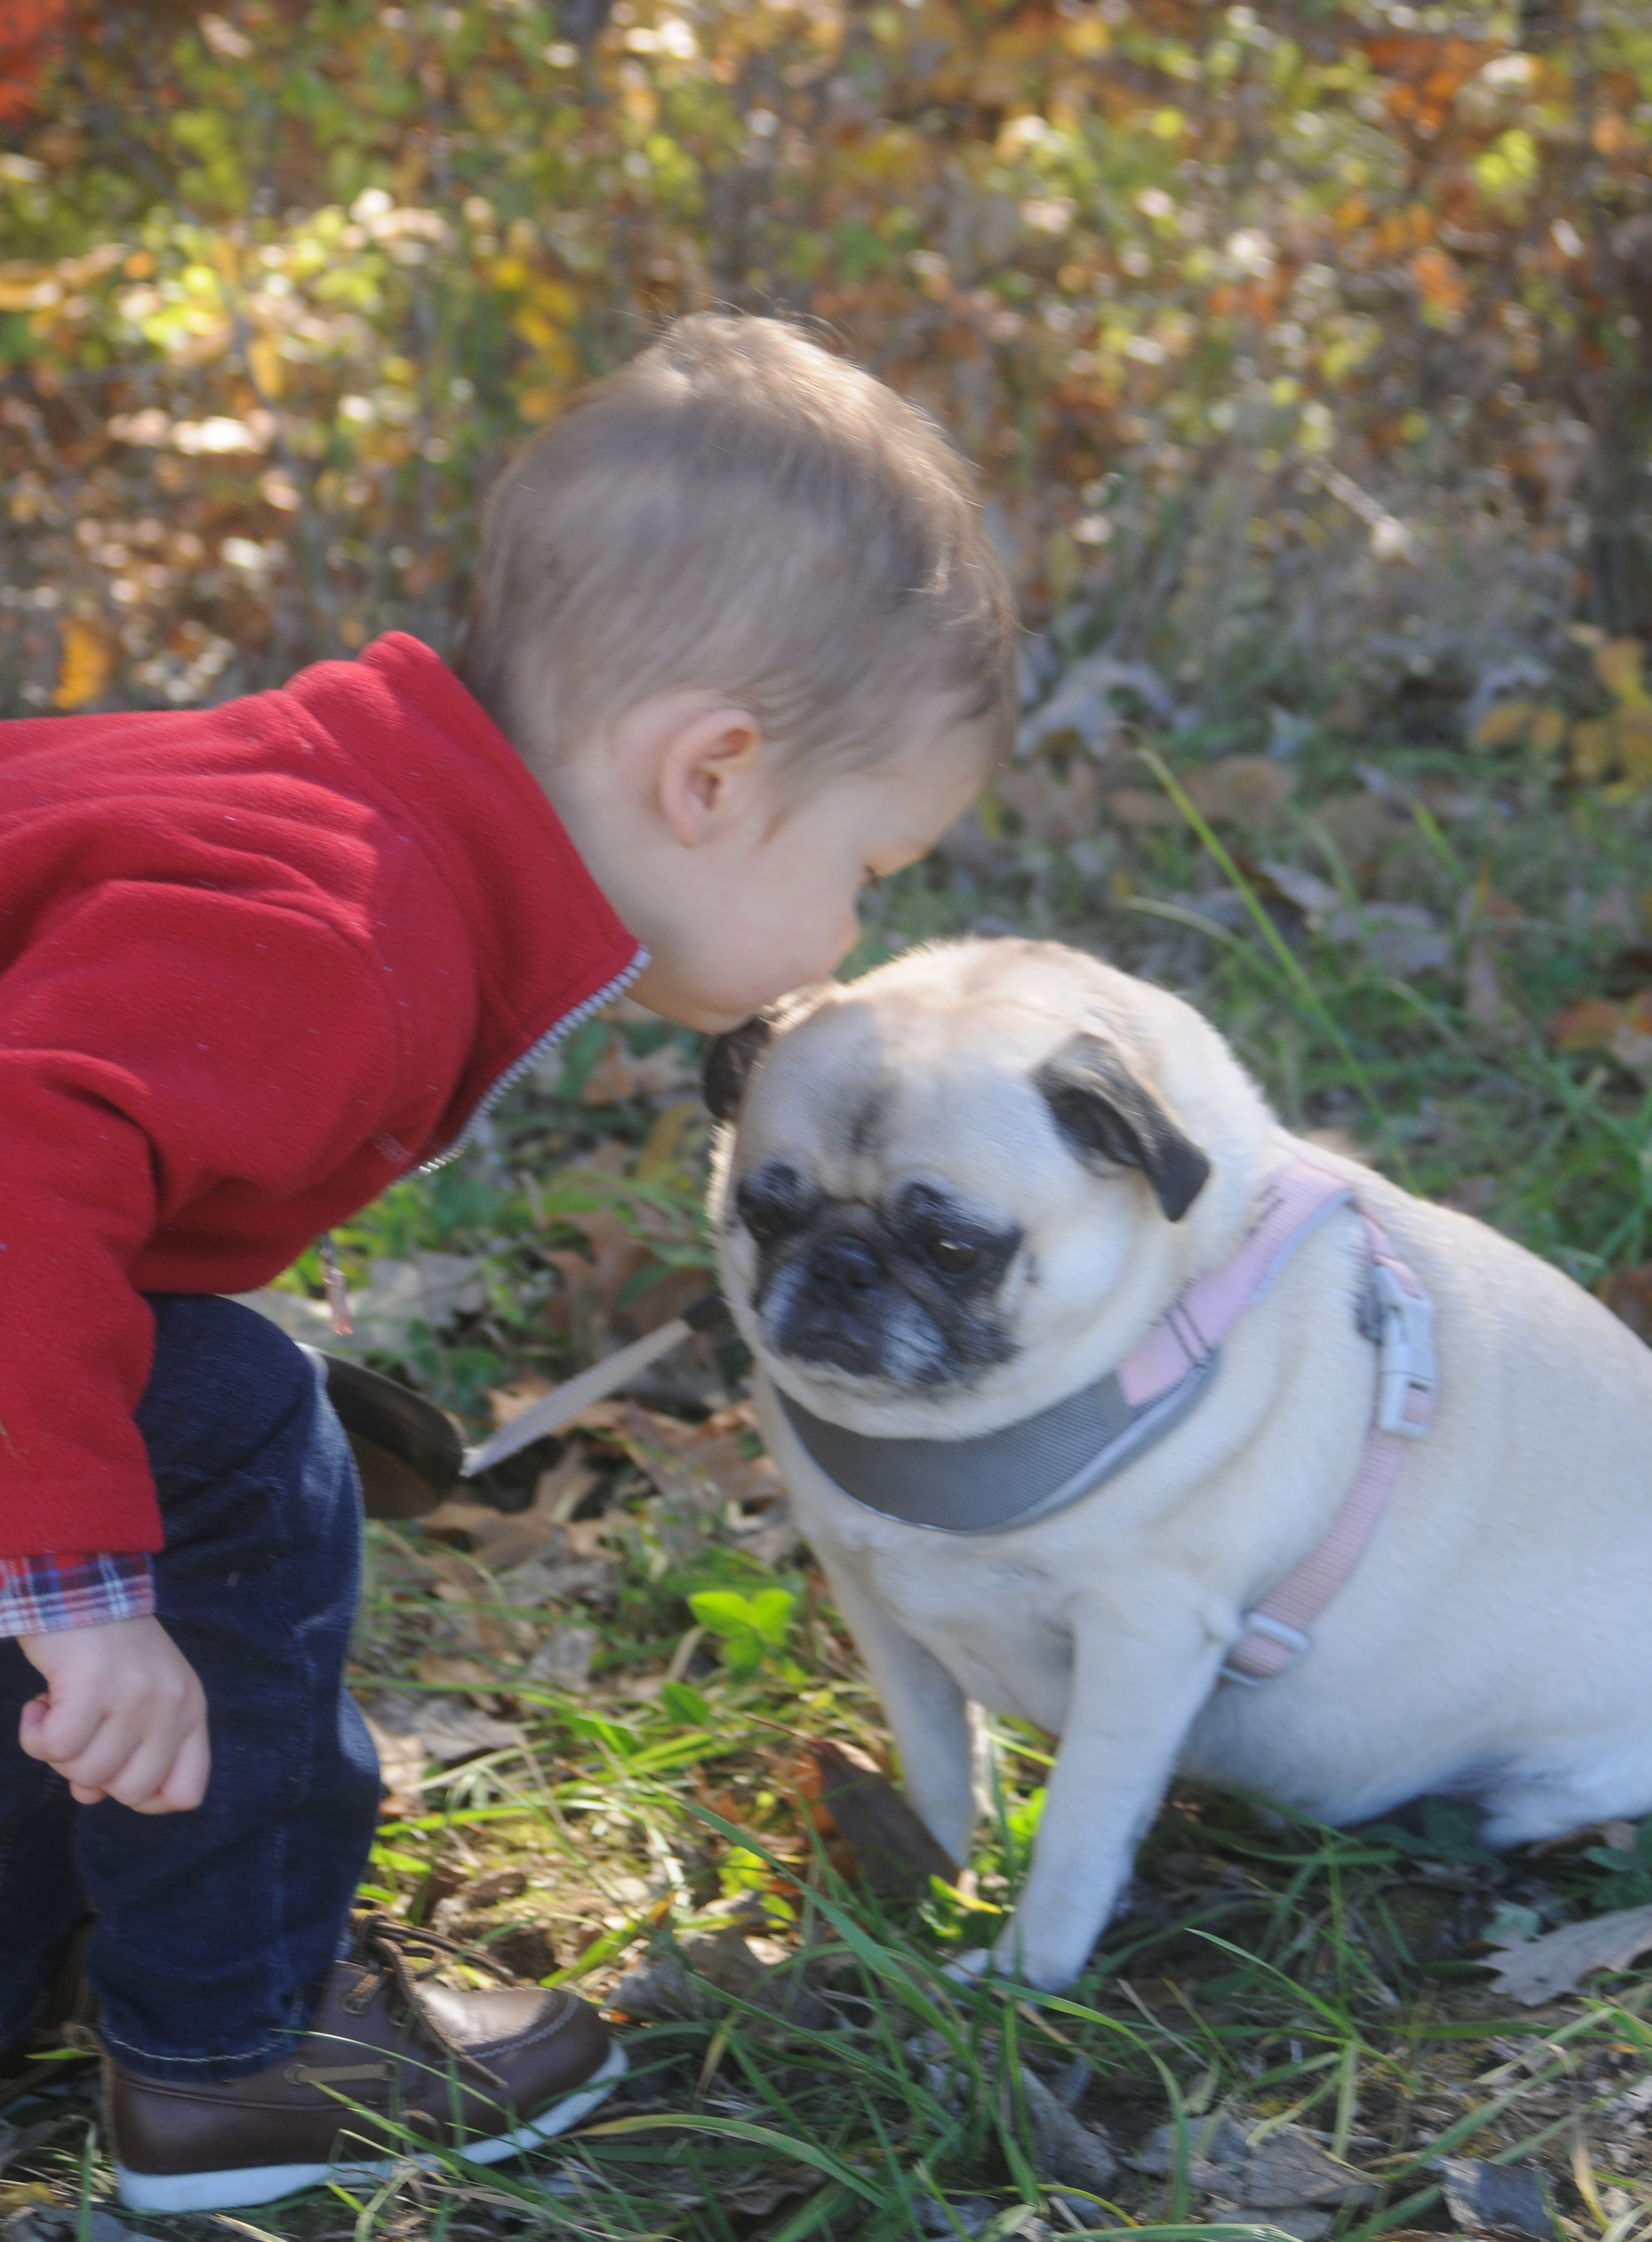 Should Pugs and Children Grow Up Together?